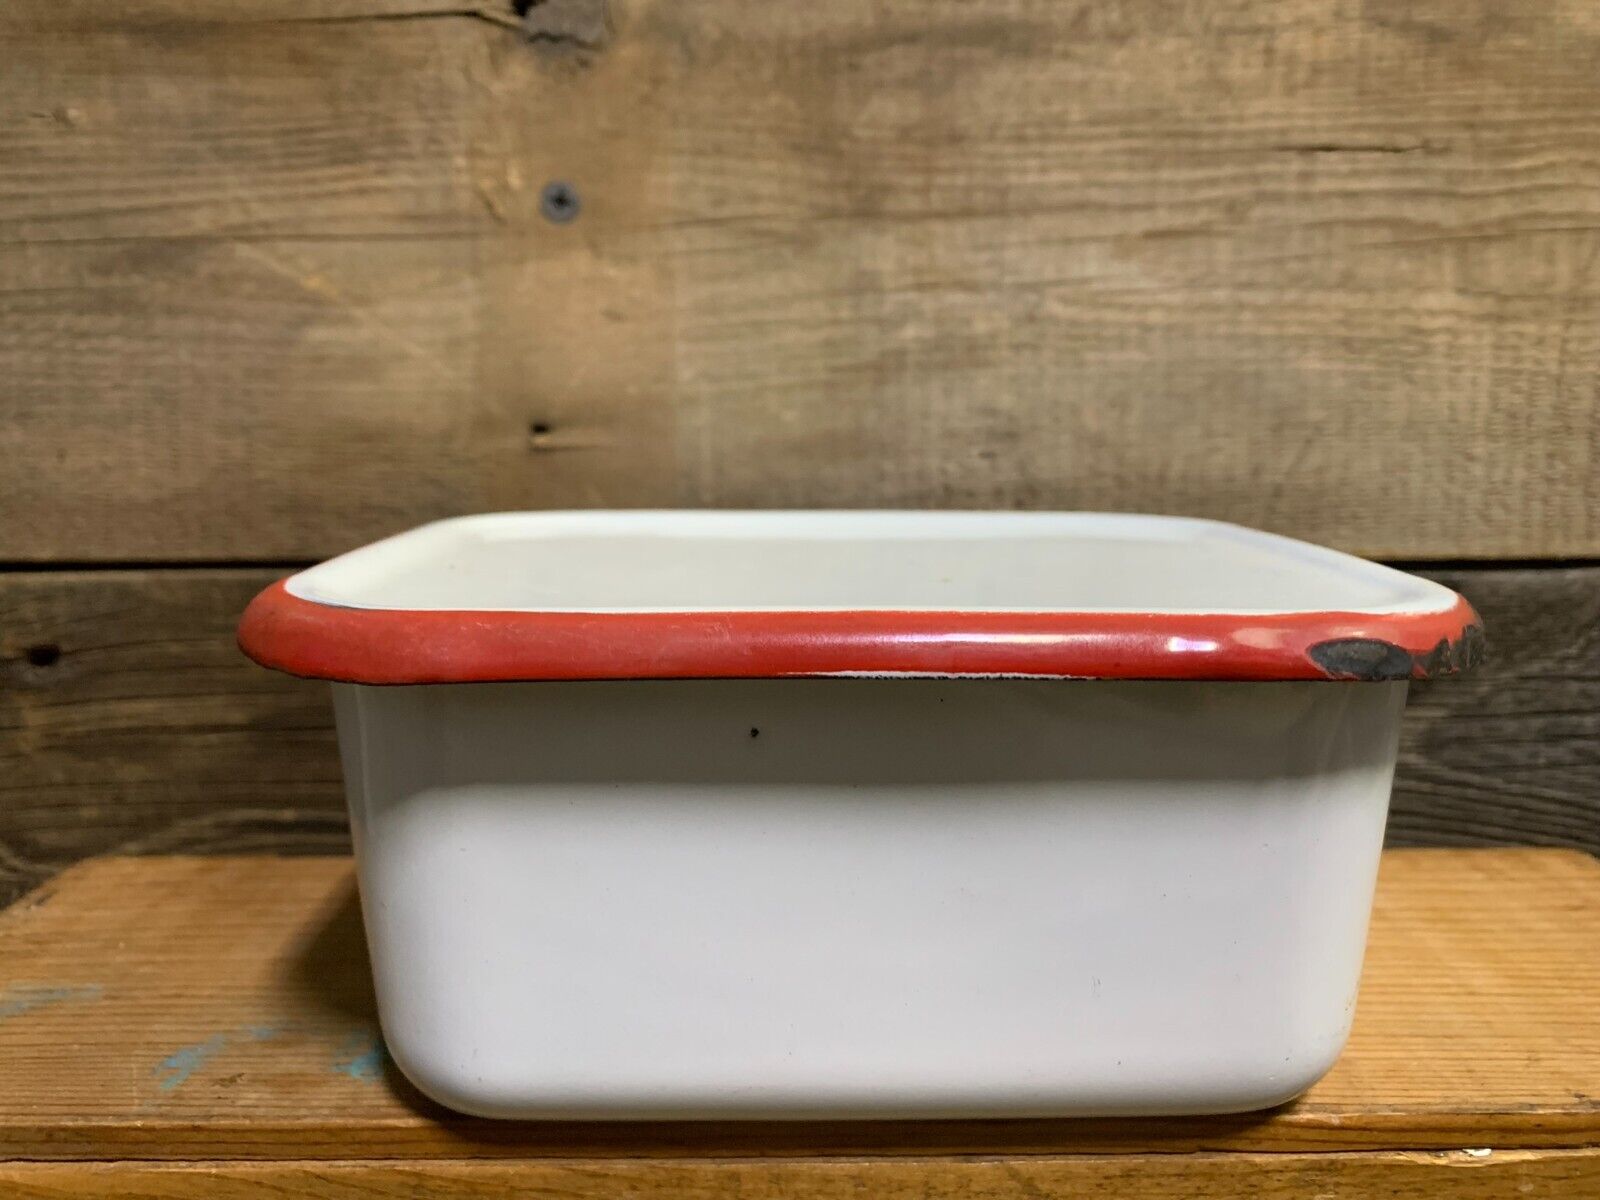 Vintage Enamelware, Refrigerator Container, White with Red Trim